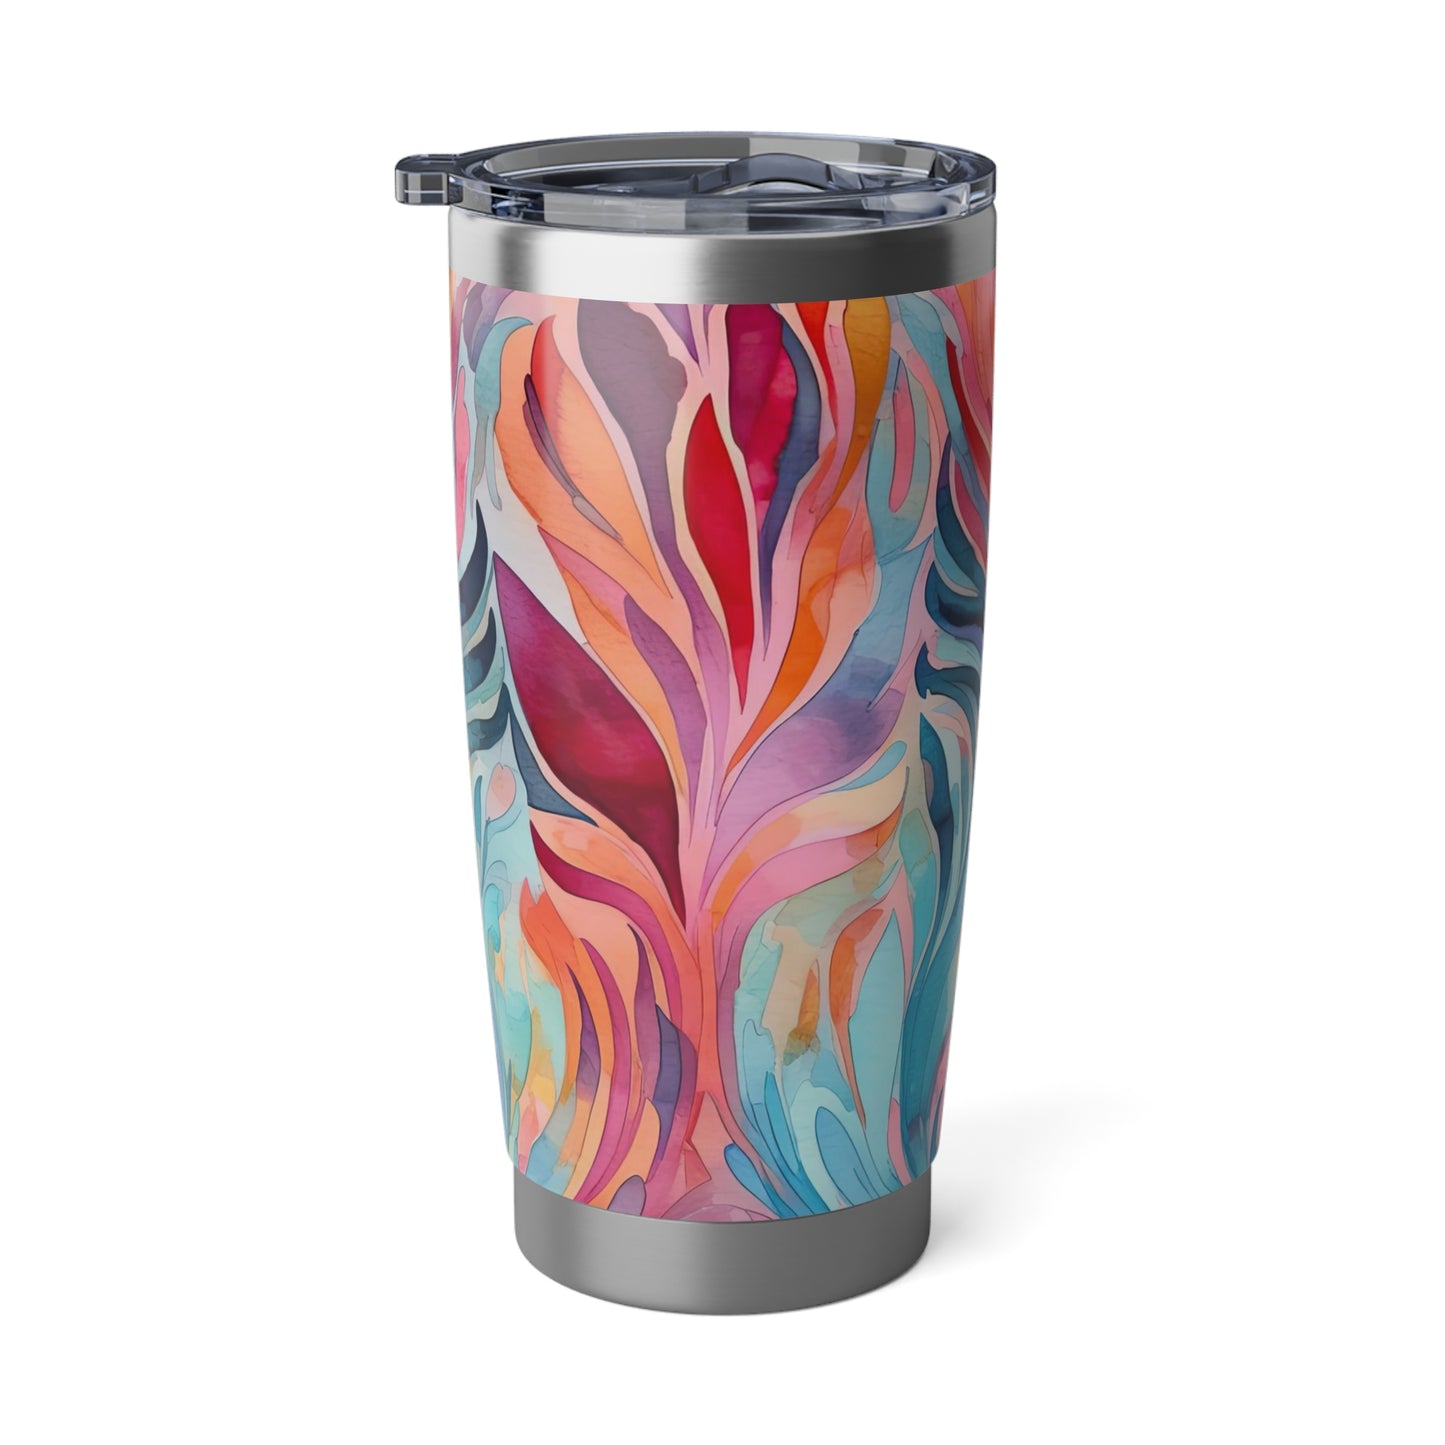 Colorful Abstract Design 1.6 - Vagabond 20oz Tumbler - Stainless Steel - Double Wall